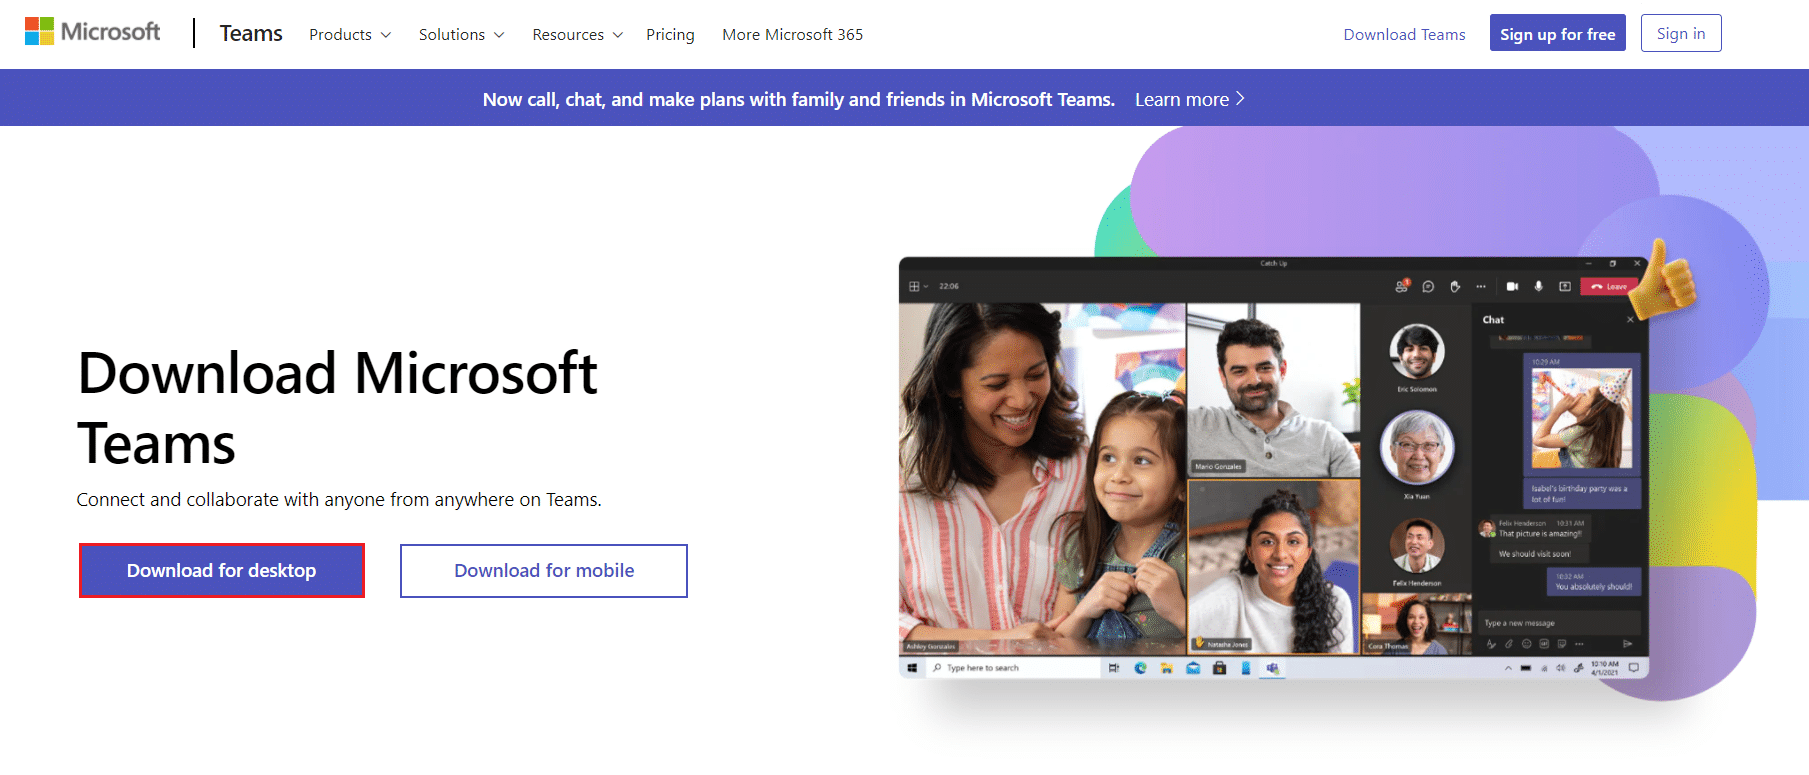 download microsoft teams from official website